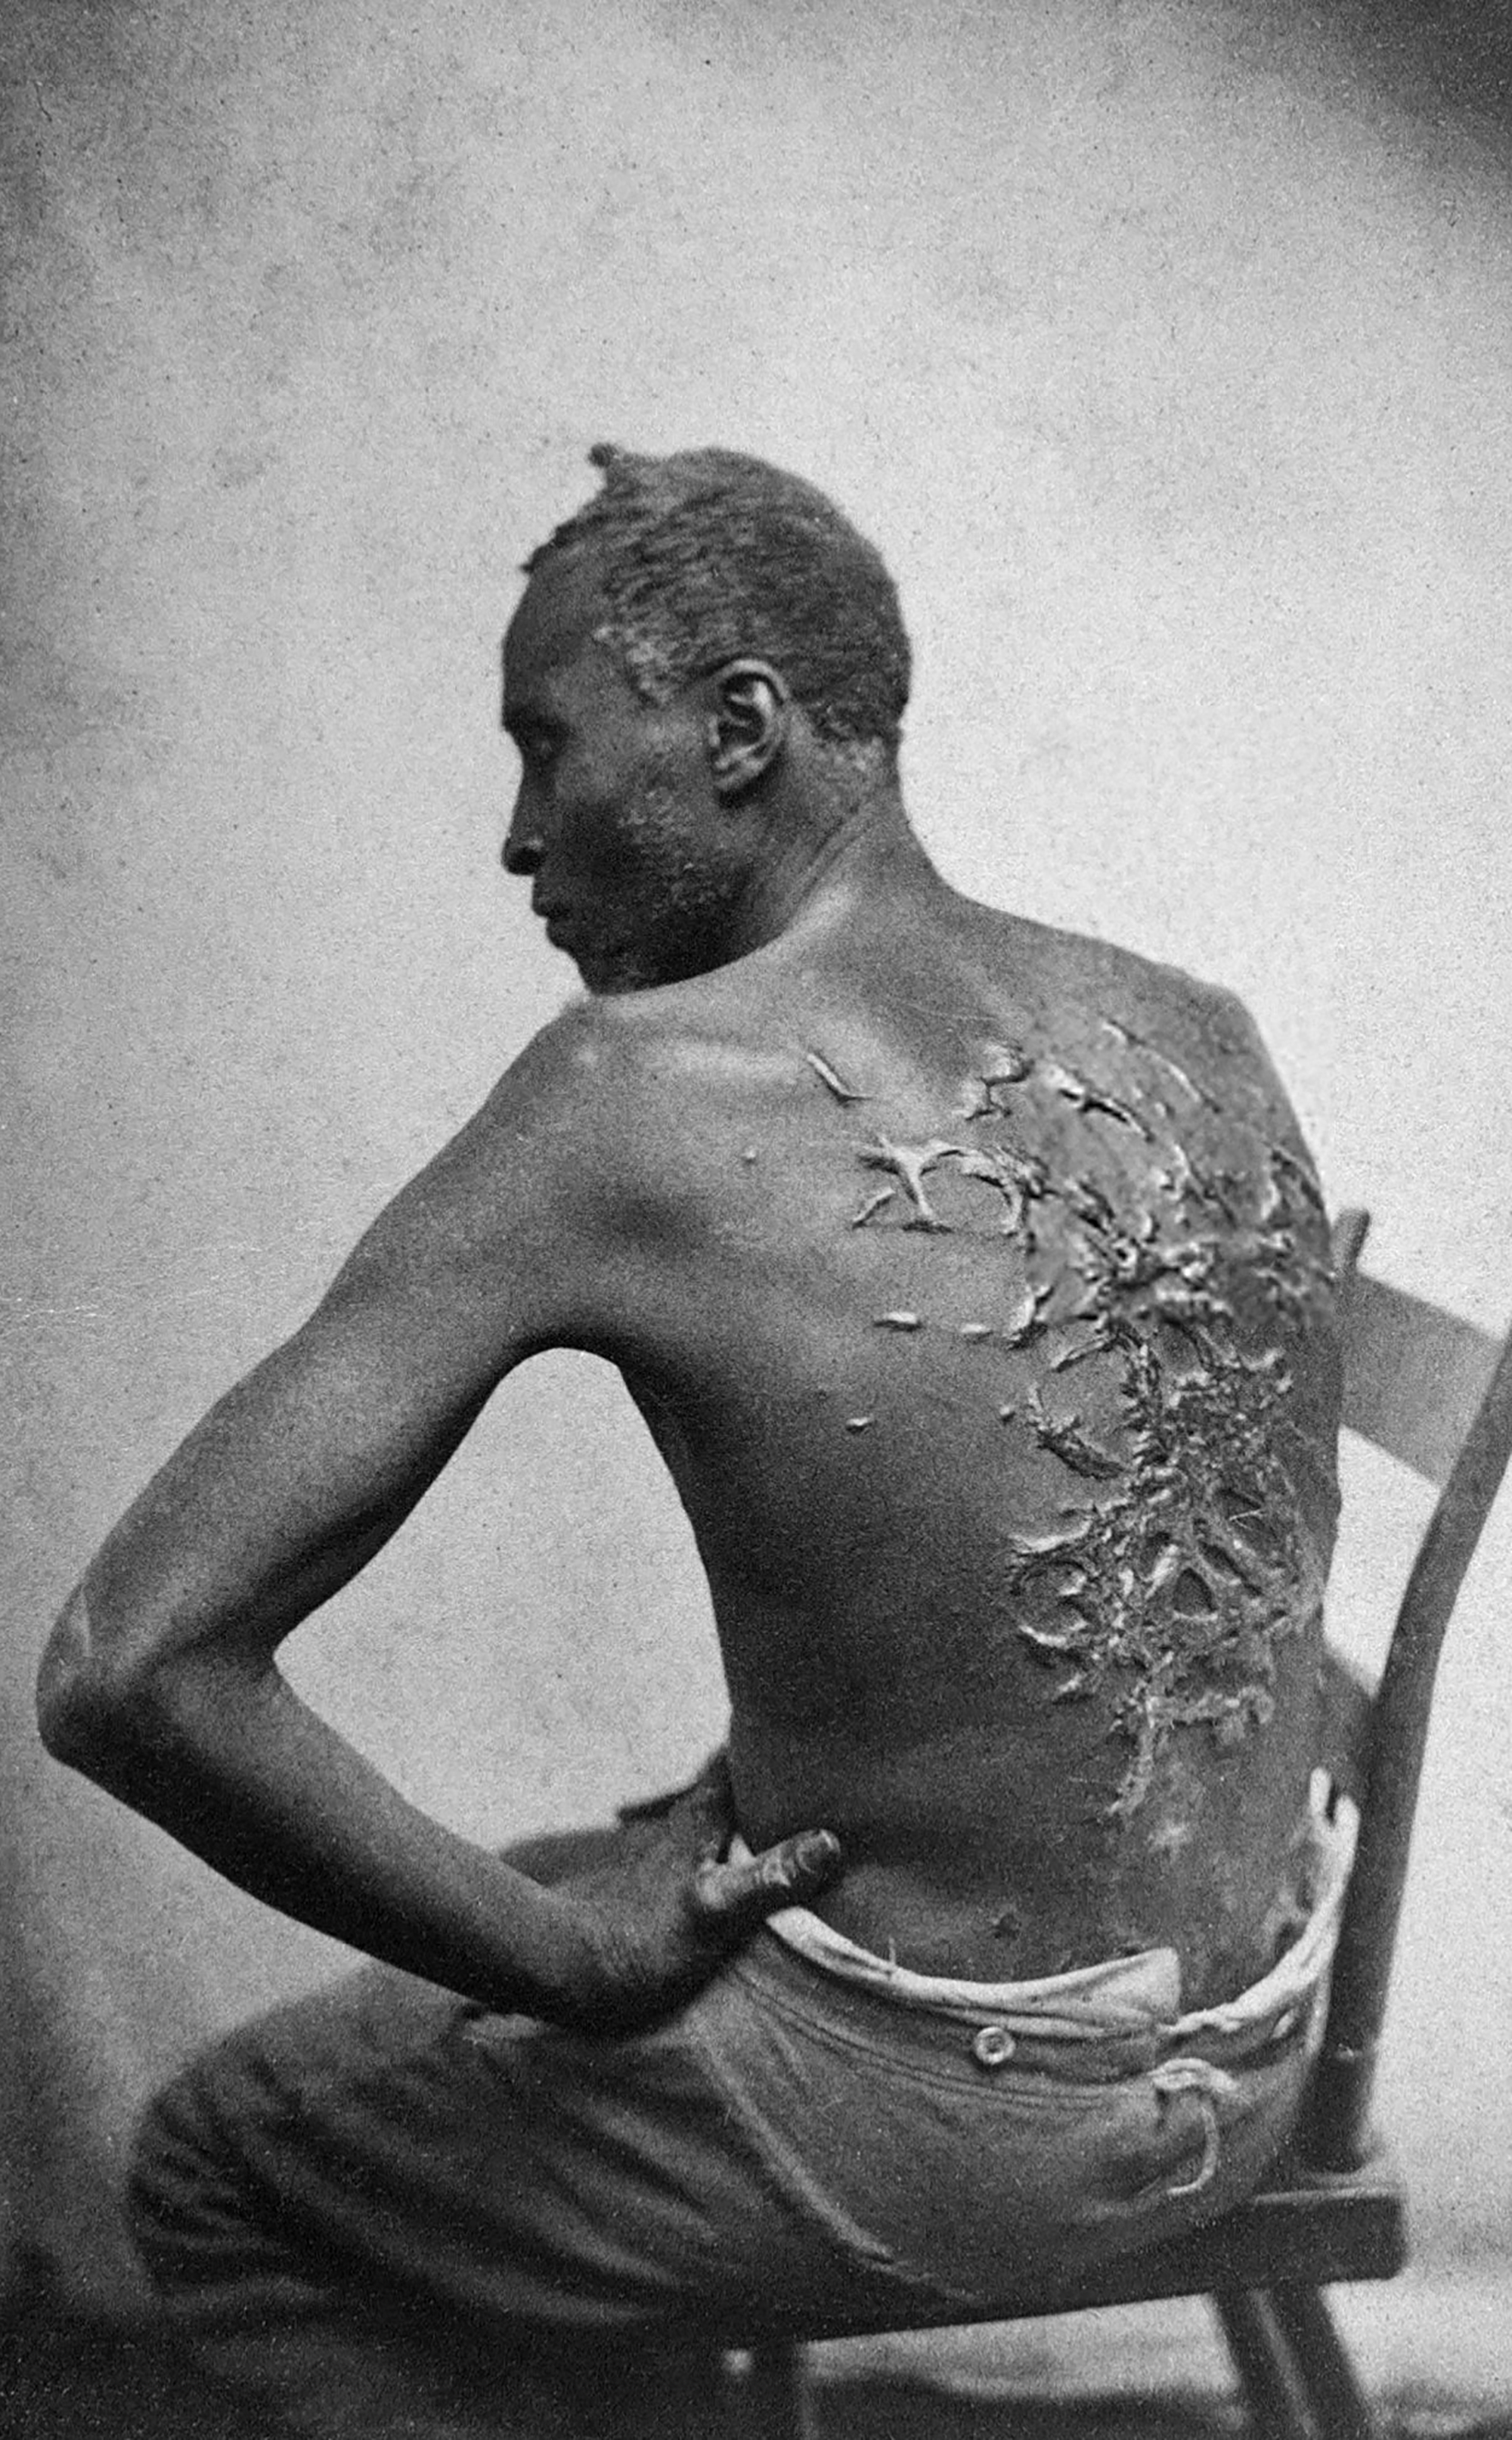 Peter or Gordon, an enslaved black man, with whip marks on his back in 1963.